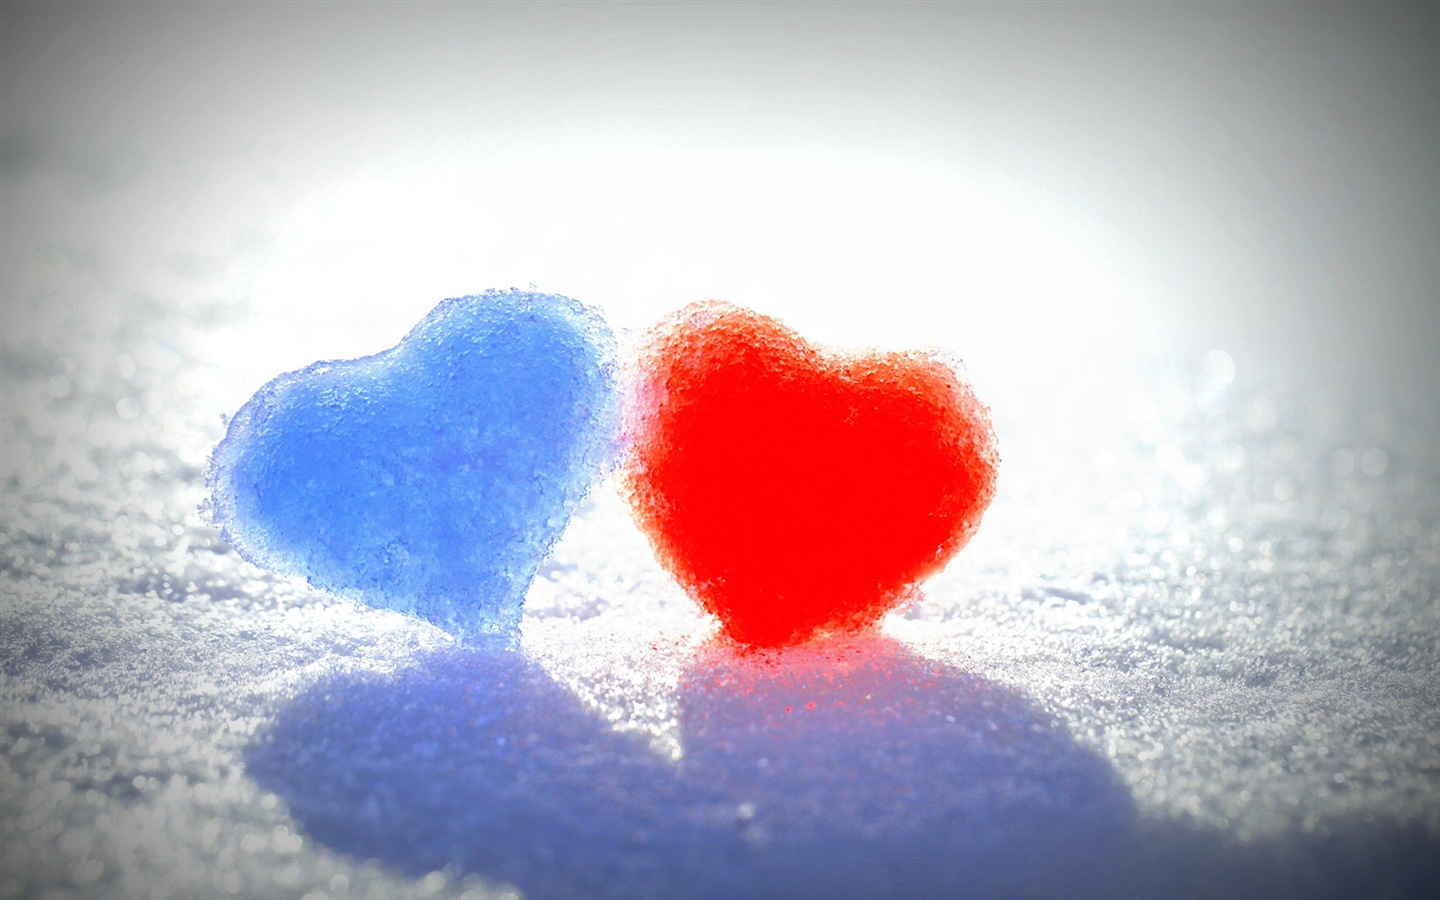 The theme of love, creative heart-shaped HD wallpapers #13 - 1440x900